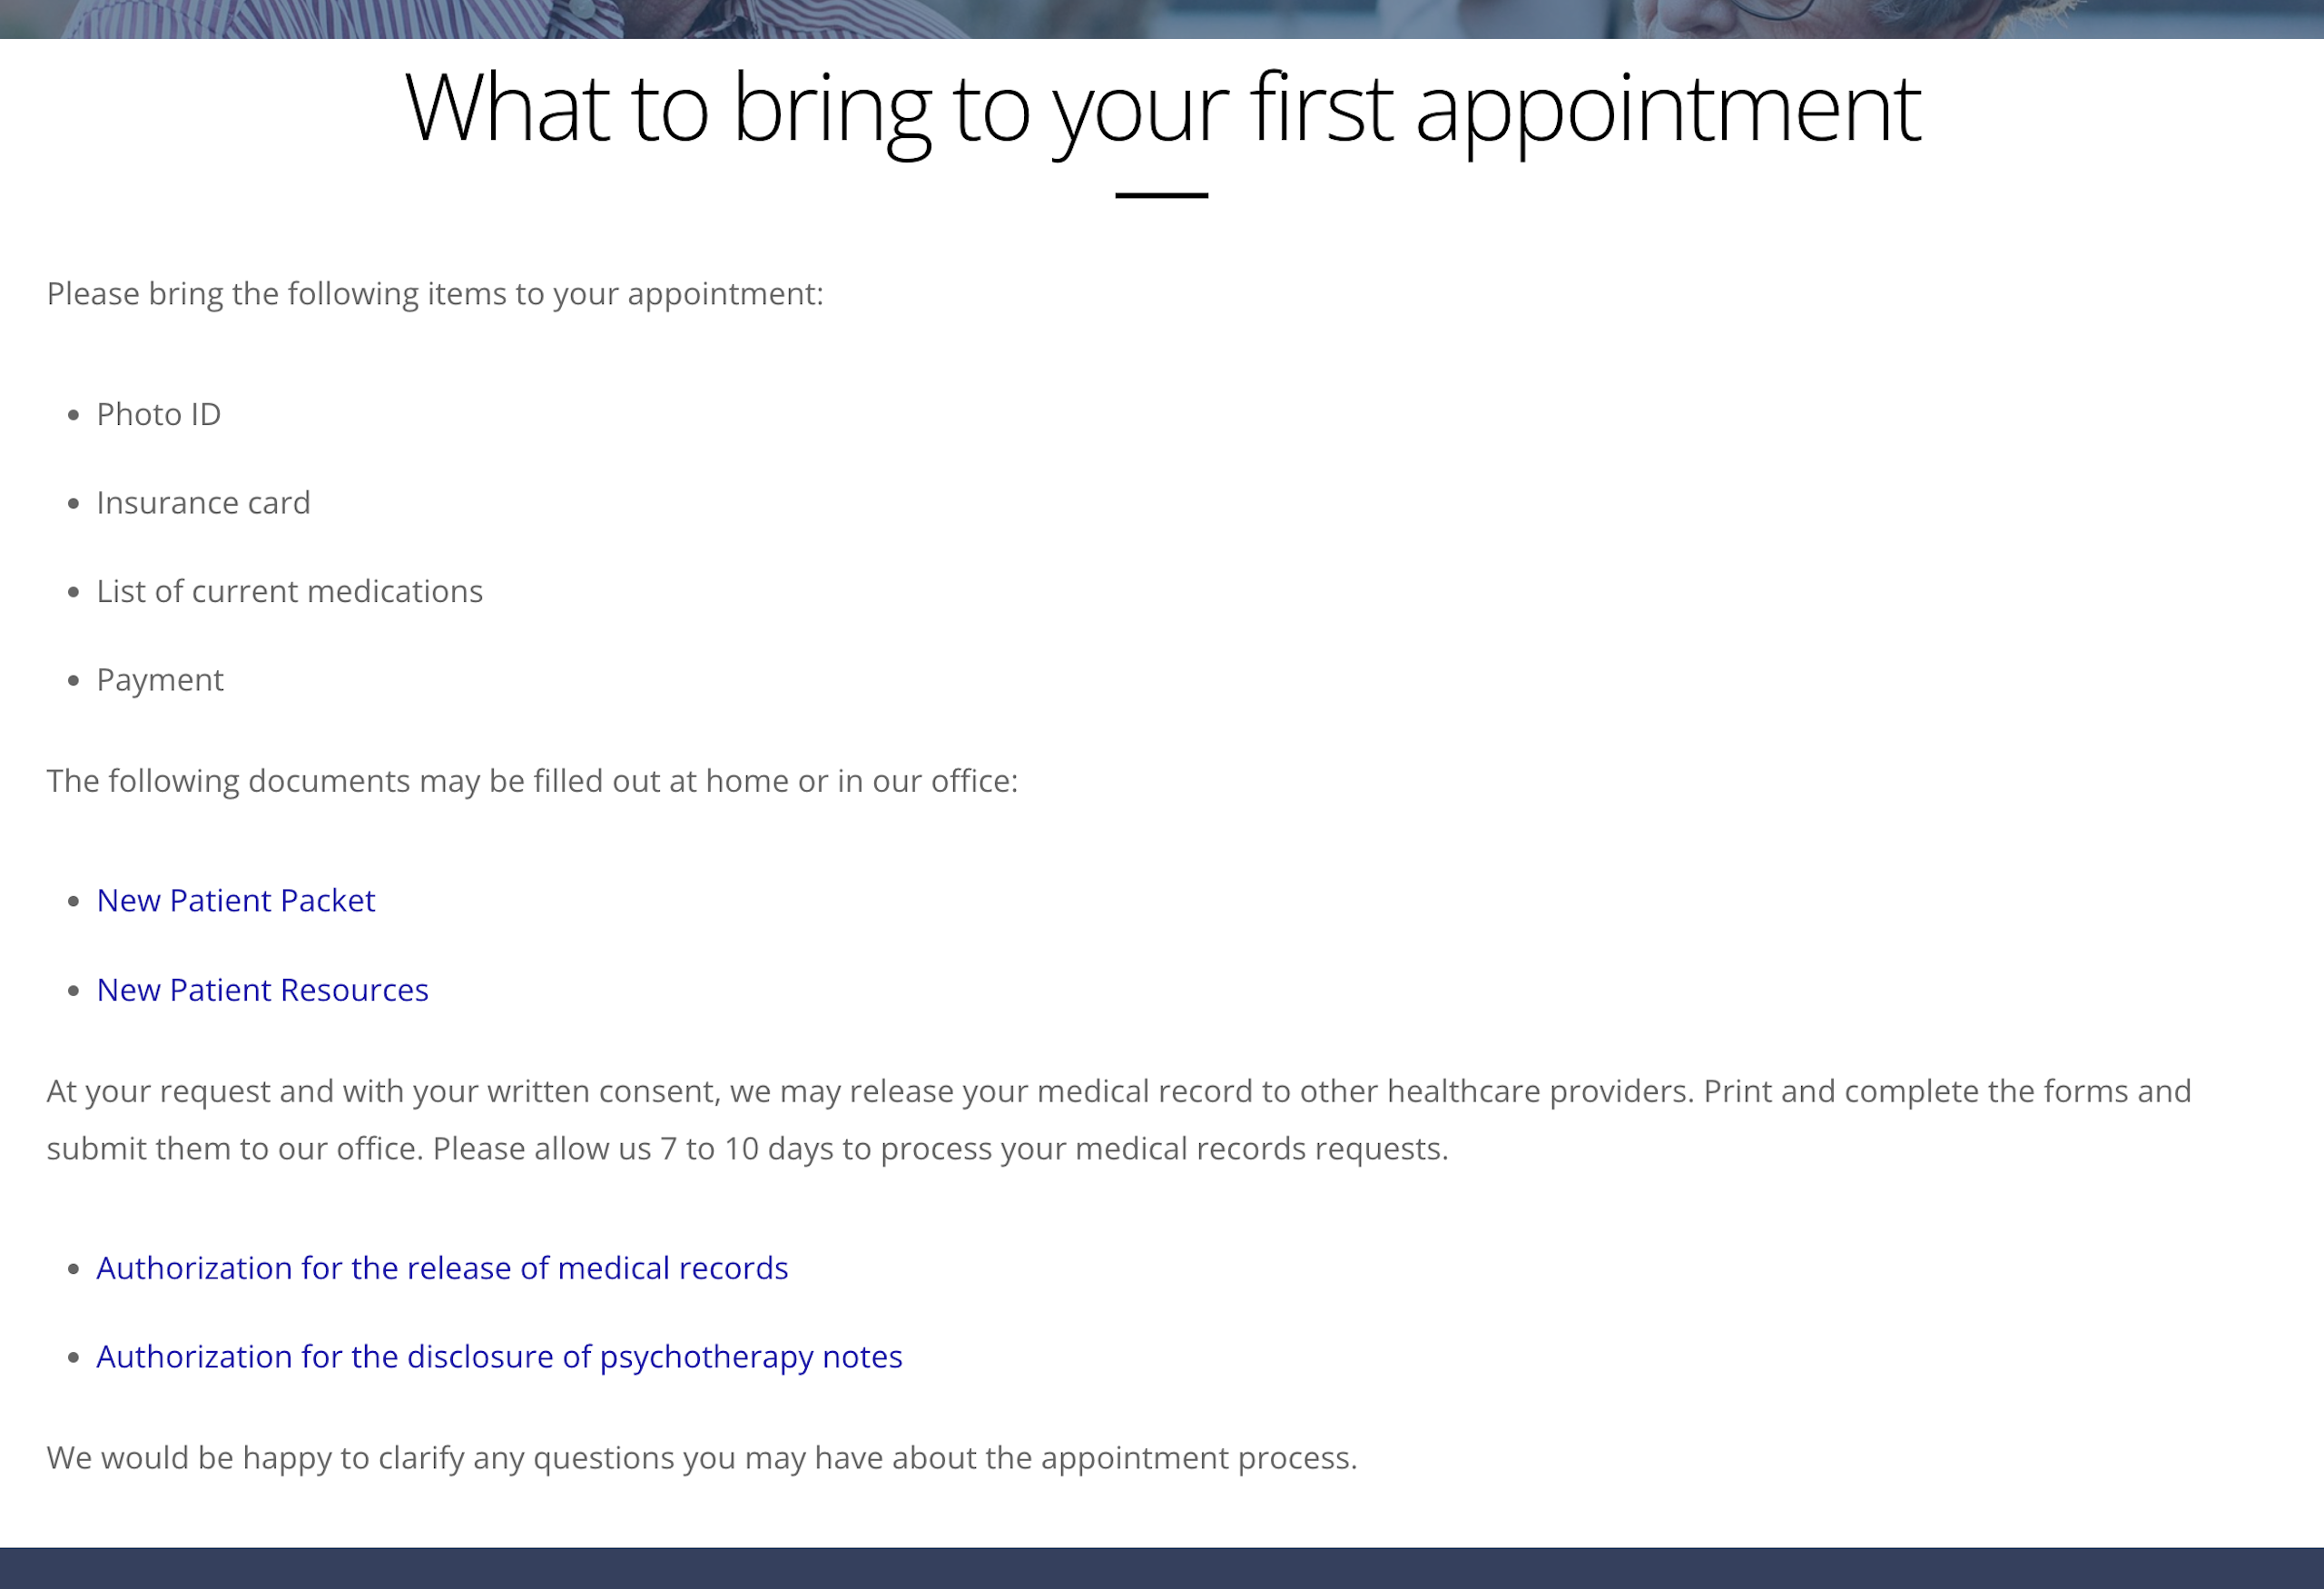 Vogelfanger and Struble Clinic's list for patients of what to bring to their first appointment